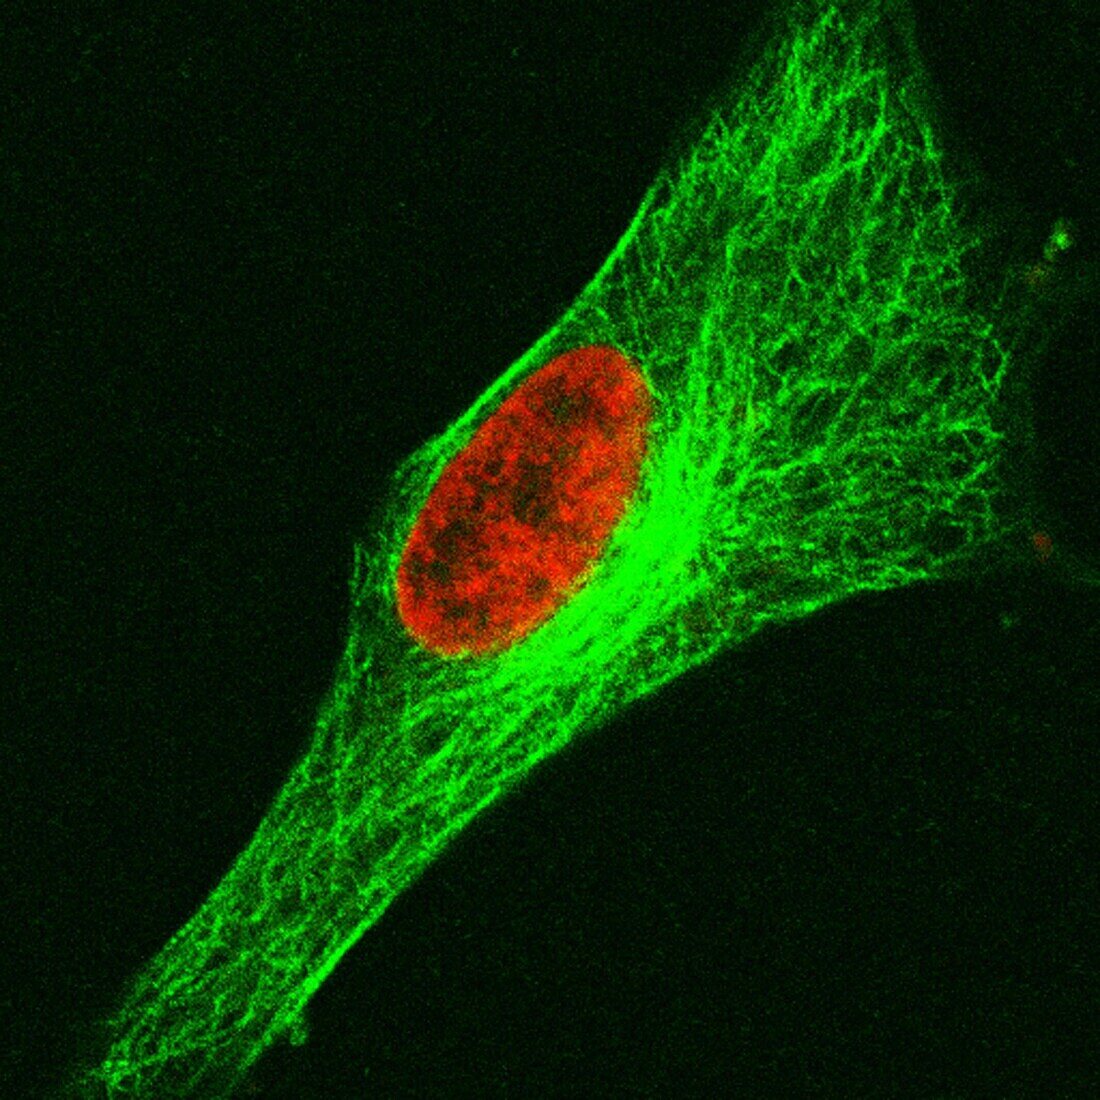 Human cell in interphase, light micrograph